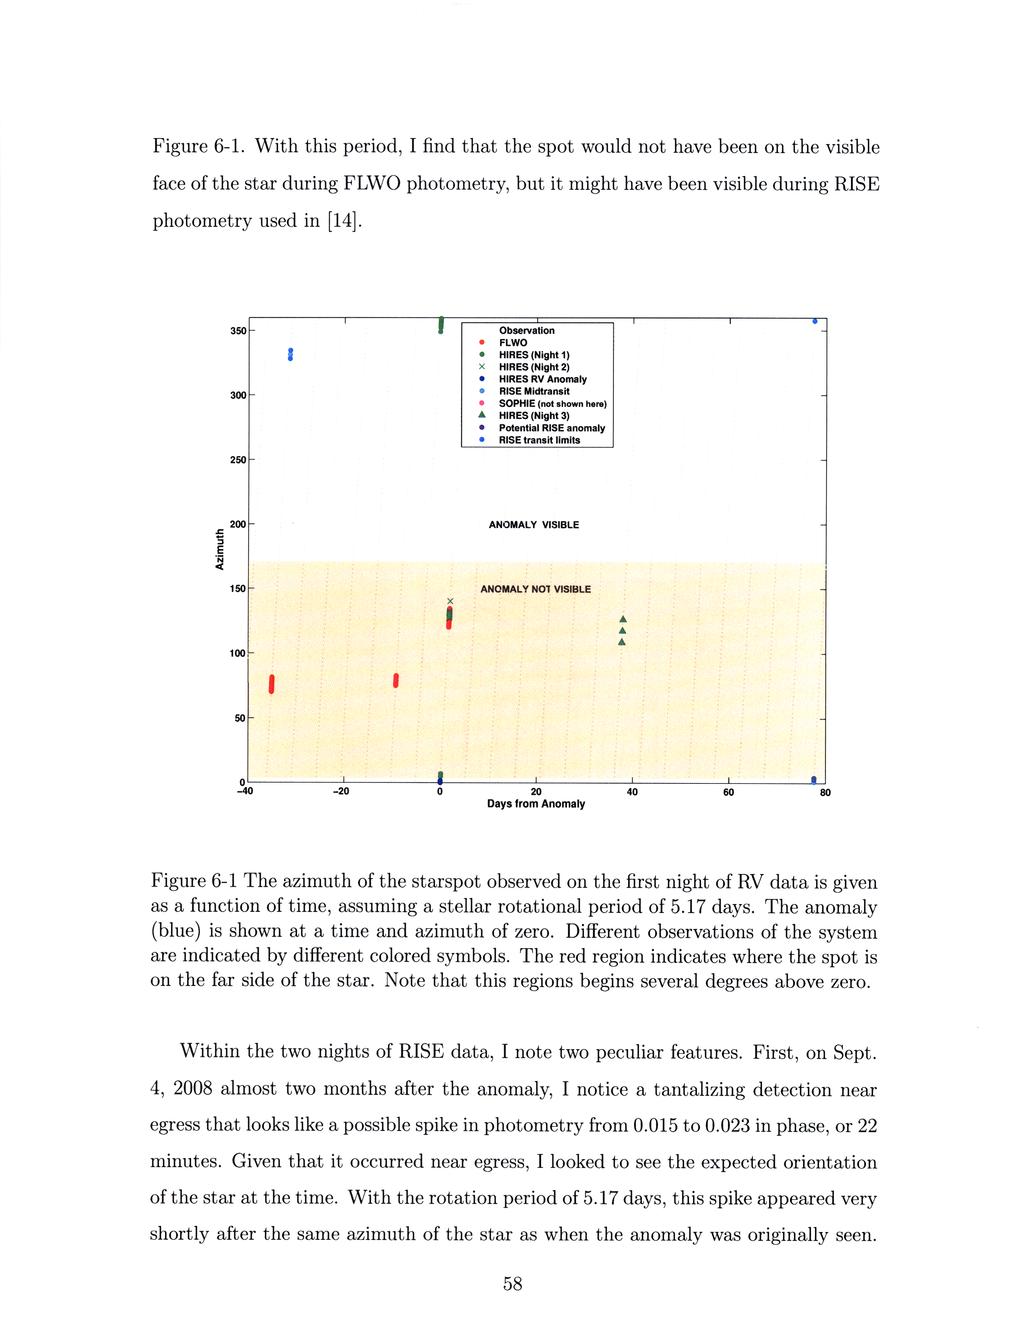 Figure 6-1. With this period, I find that the spot would not have been on the visible face of the star during FLWO photometry, but it might have been visible during RISE photometry used in [14].